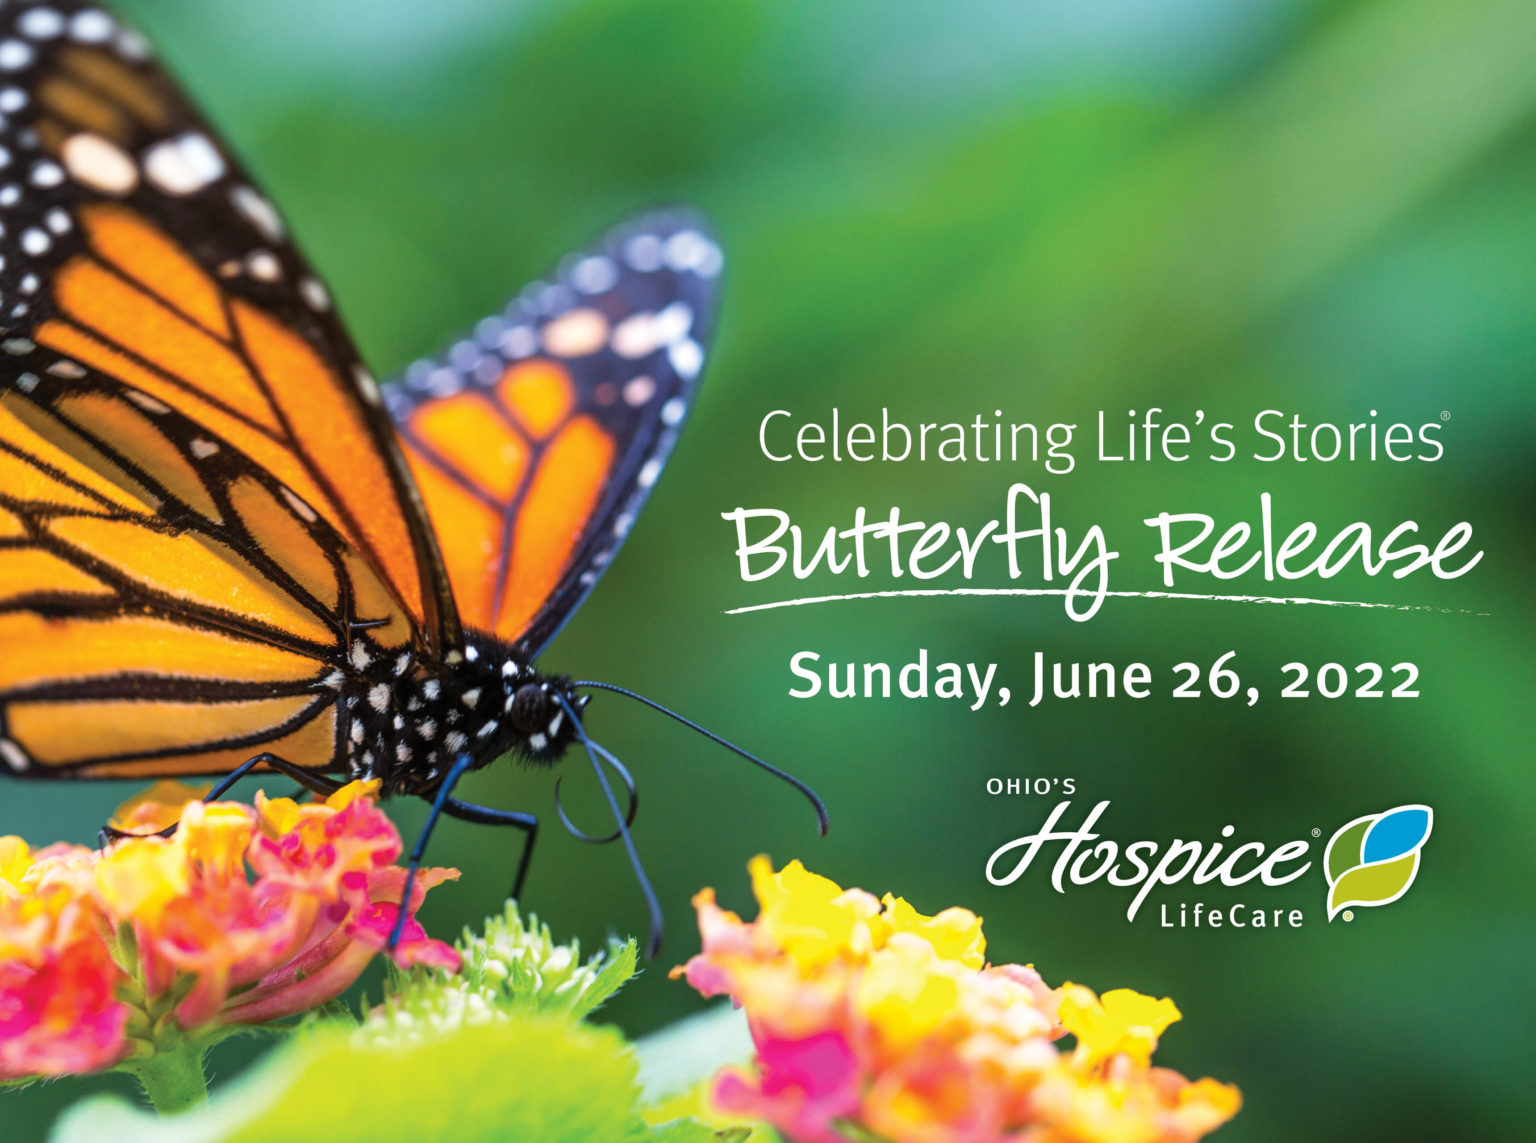 Ohio's Hospice LifeCare to Hold Butterfly Release on June 26